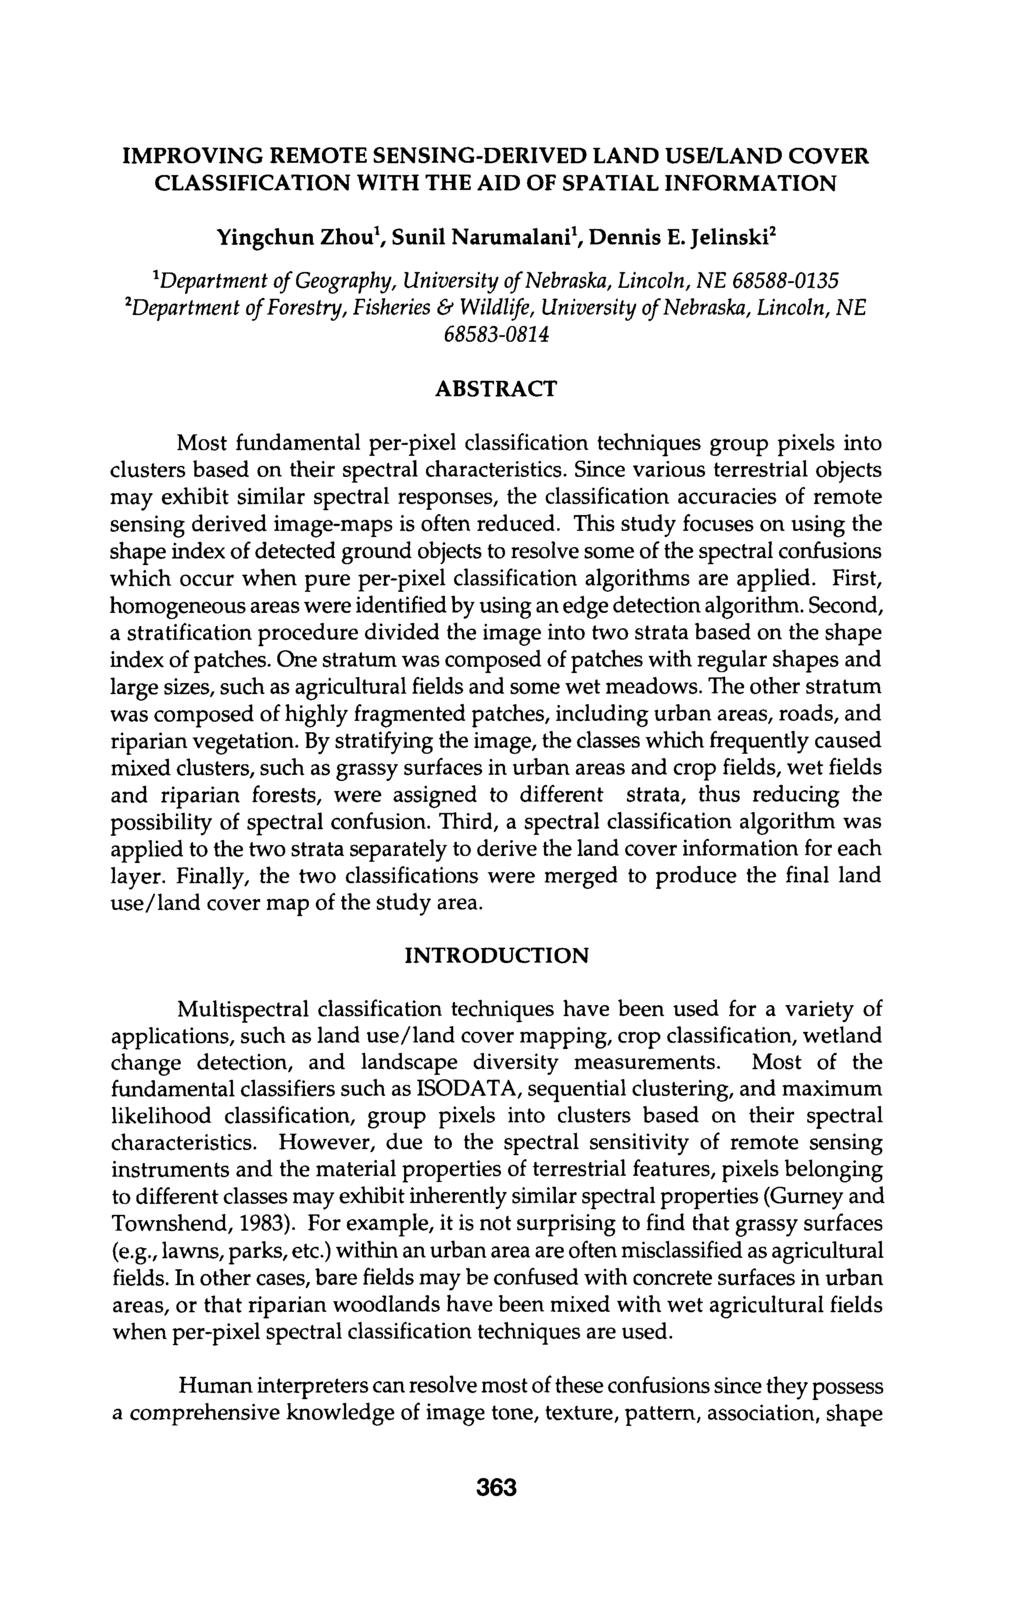 IMPROVING REMOTE SENSING-DERIVED LAND USE/LAND COVER CLASSIFICATION WITH THE AID OF SPATIAL INFORMATION Yingchun Zhou1, Sunil Narumalani1, Dennis E.